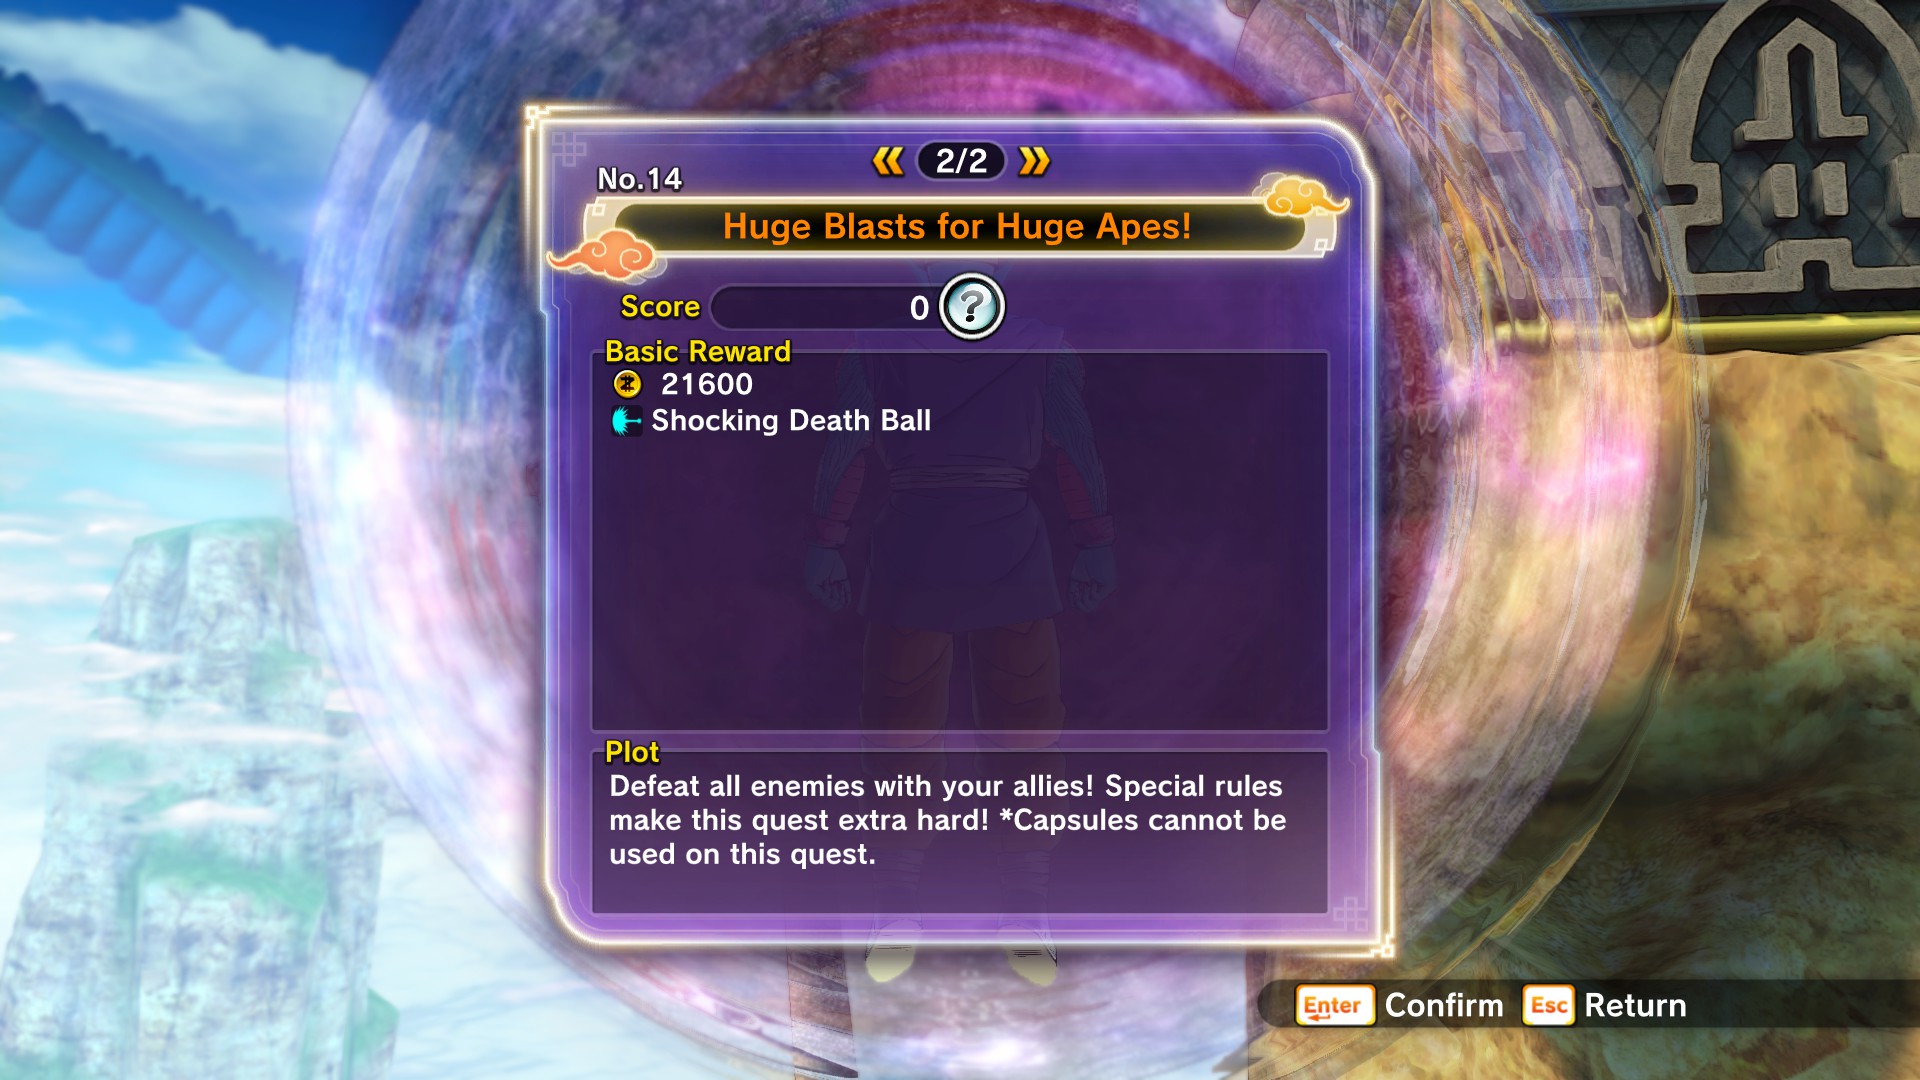 Dragon Ball Xenoverse 2 All Expert Missions Locations, Success Tips,  Rewards, Win Conditions 